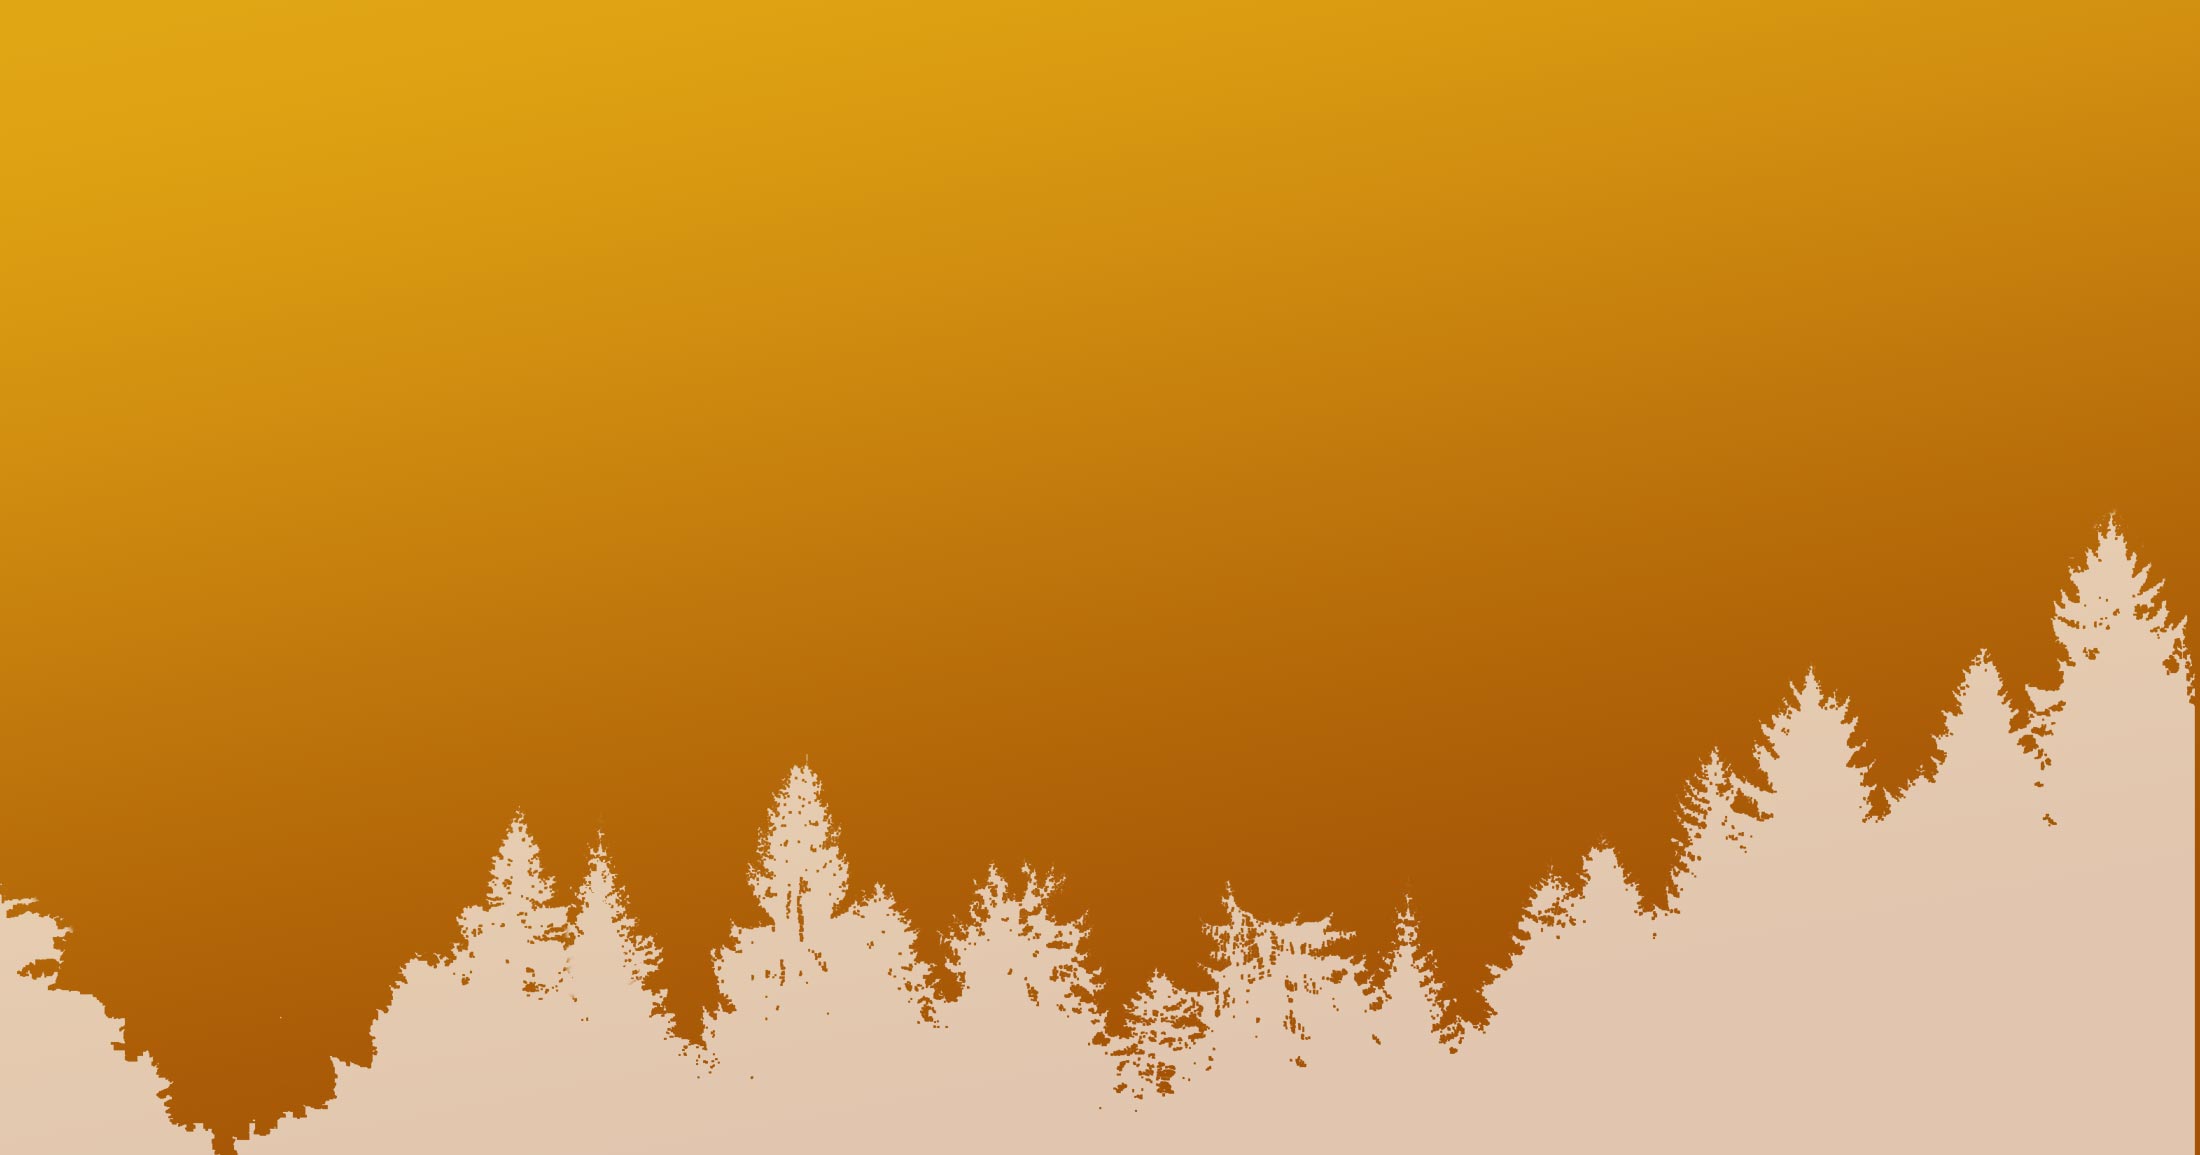 Forest illustration, white drawn tree tops with a twilight yellow background.